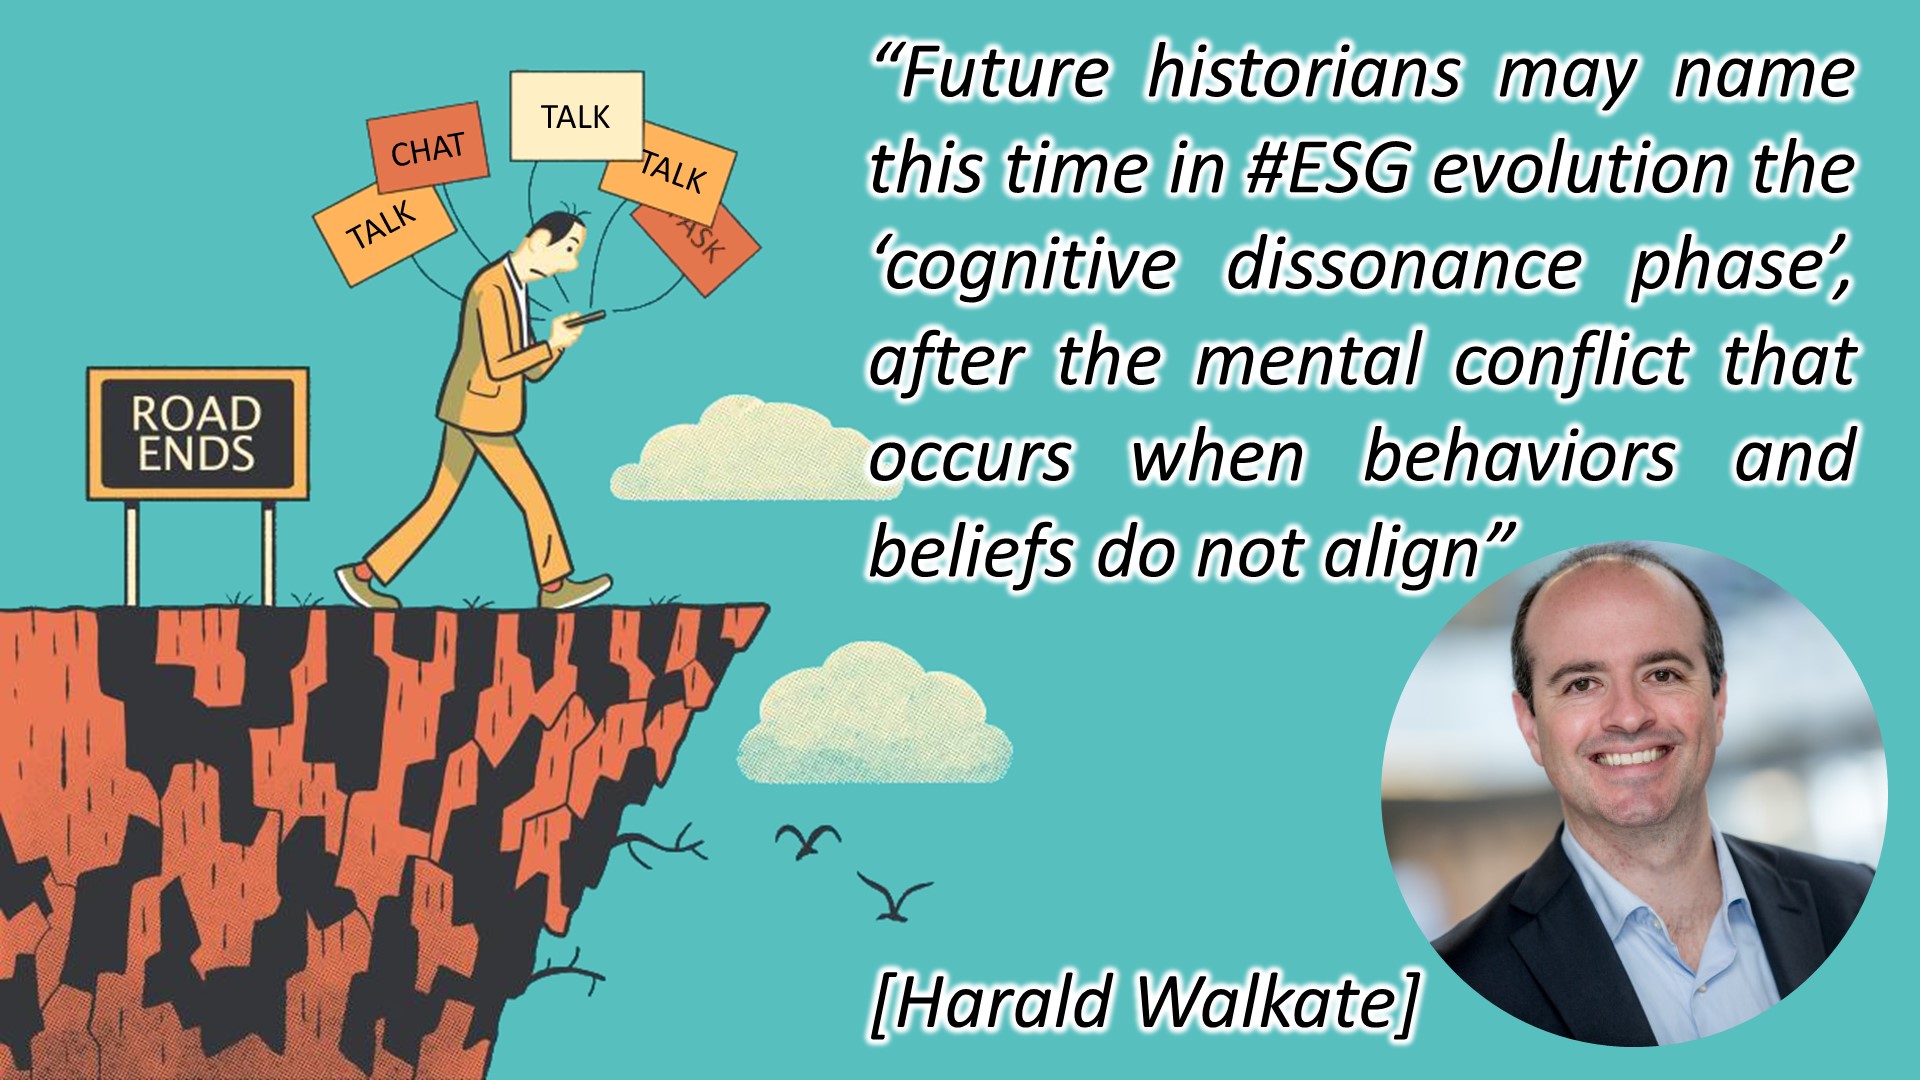 Future historians may name this time in #ESG evolution the 'cognitive dissonance phase', after the mental conflict that occurs when behaviors and beliefs do not align [Harald Walkate]